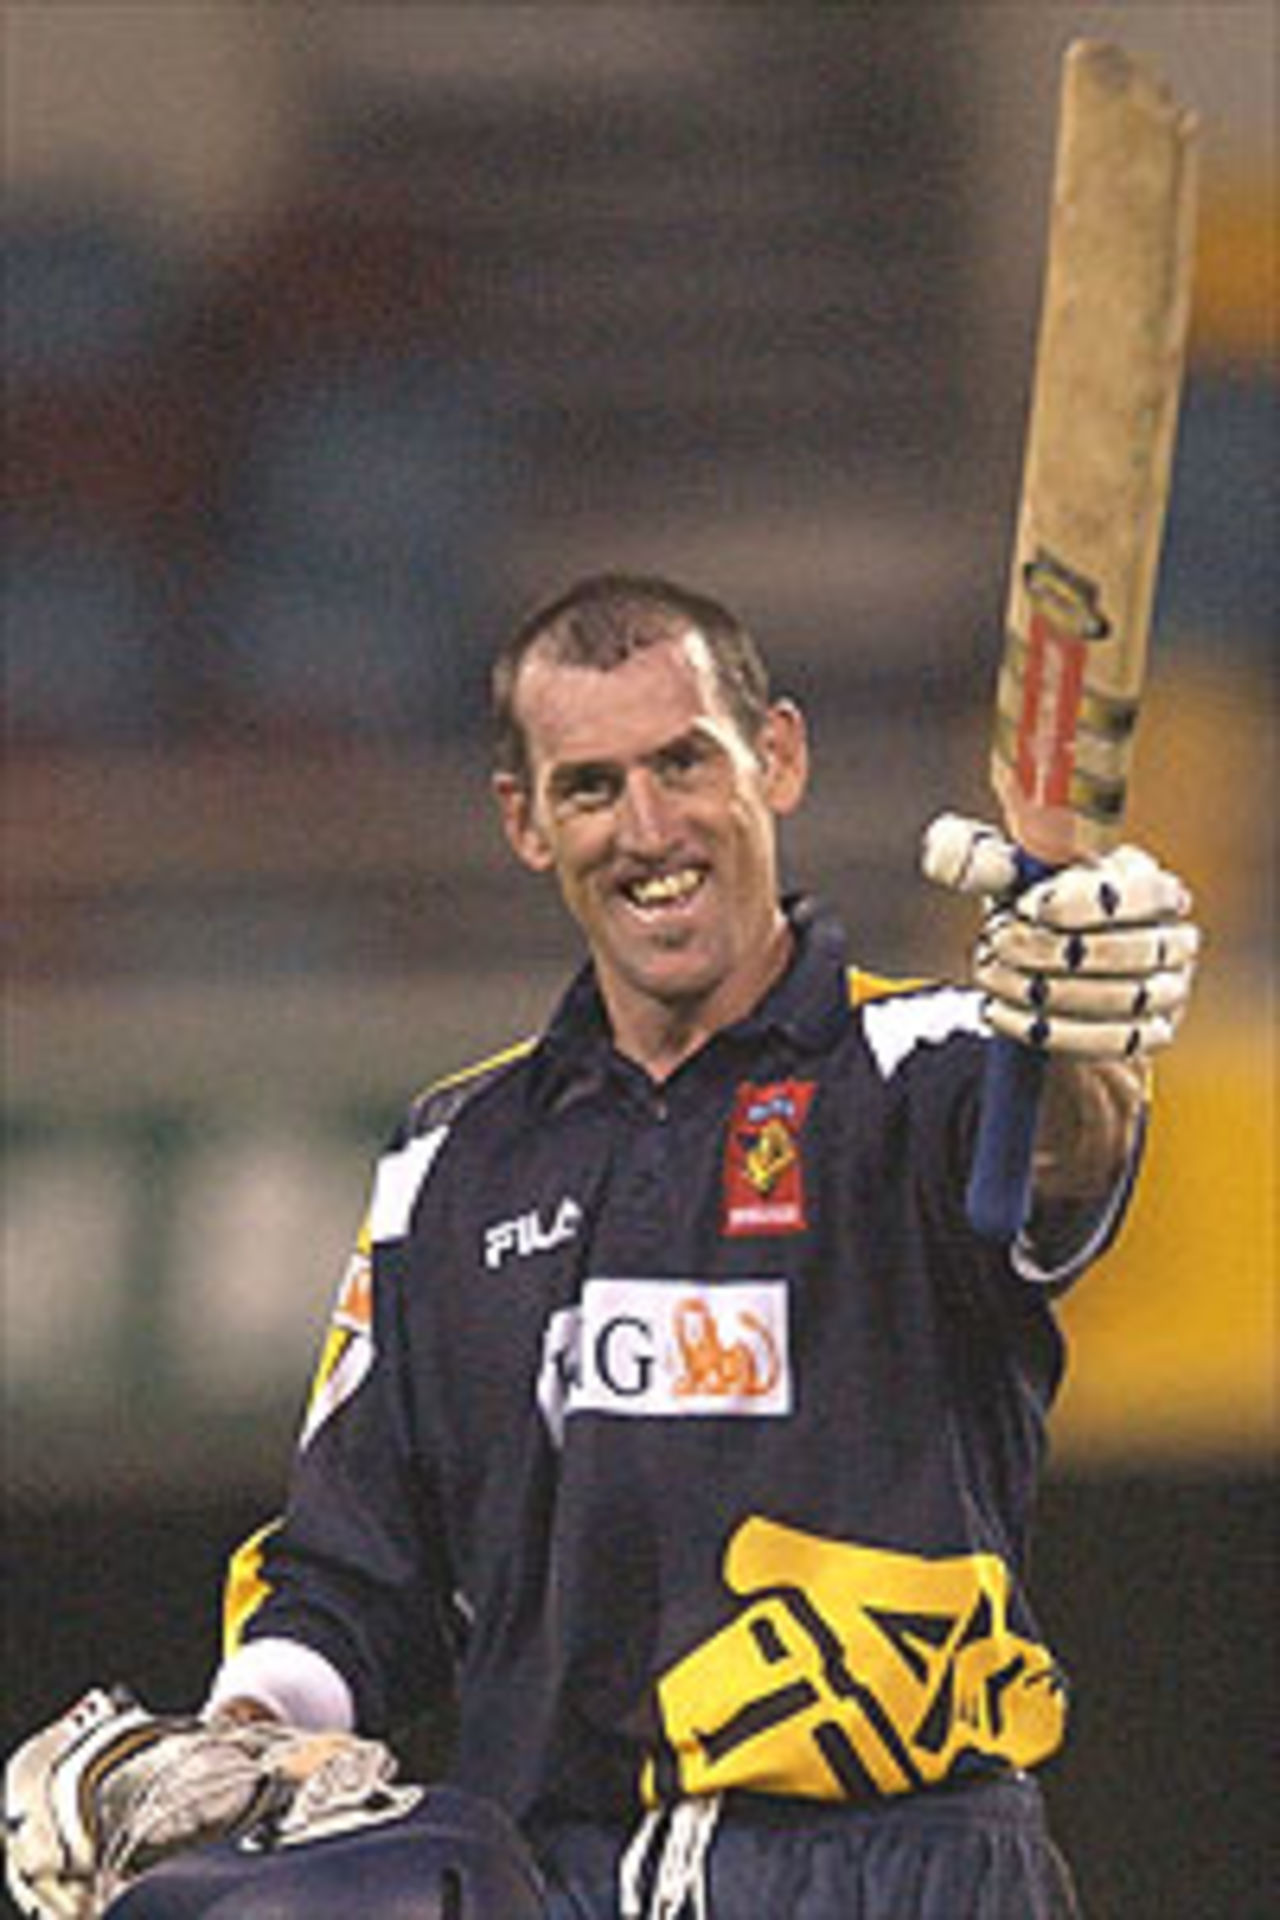 Matthew Elliott of the Bushrangers celebrates scoring a century against the Bulls during the ING Cup match between the Queensland Bulls and the Victoria Bushrangers at the Gabba October 31, 2003 in Brisbane, Australia.